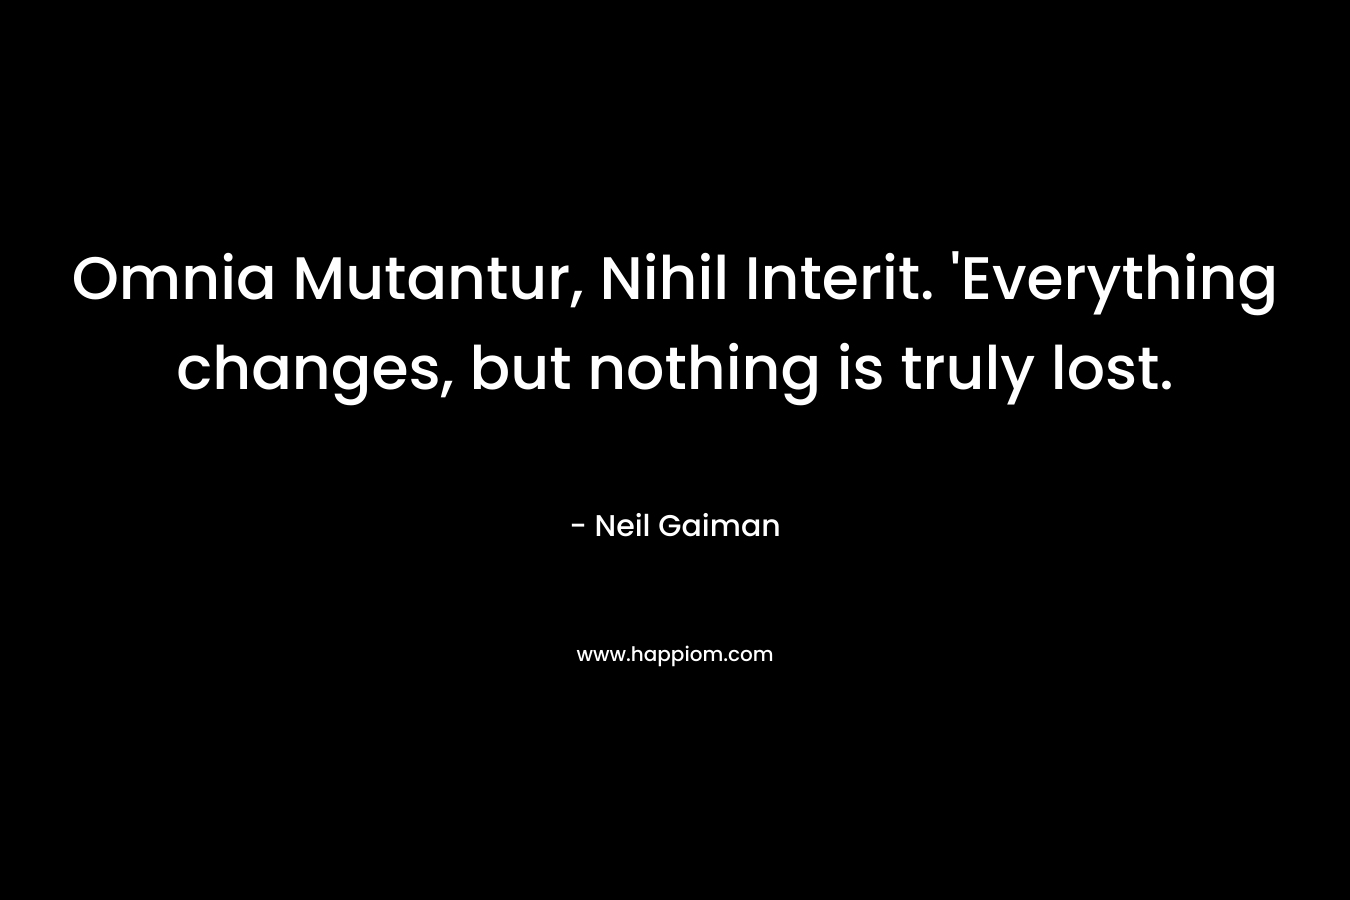 Omnia Mutantur, Nihil Interit. ‘Everything changes, but nothing is truly lost. – Neil Gaiman